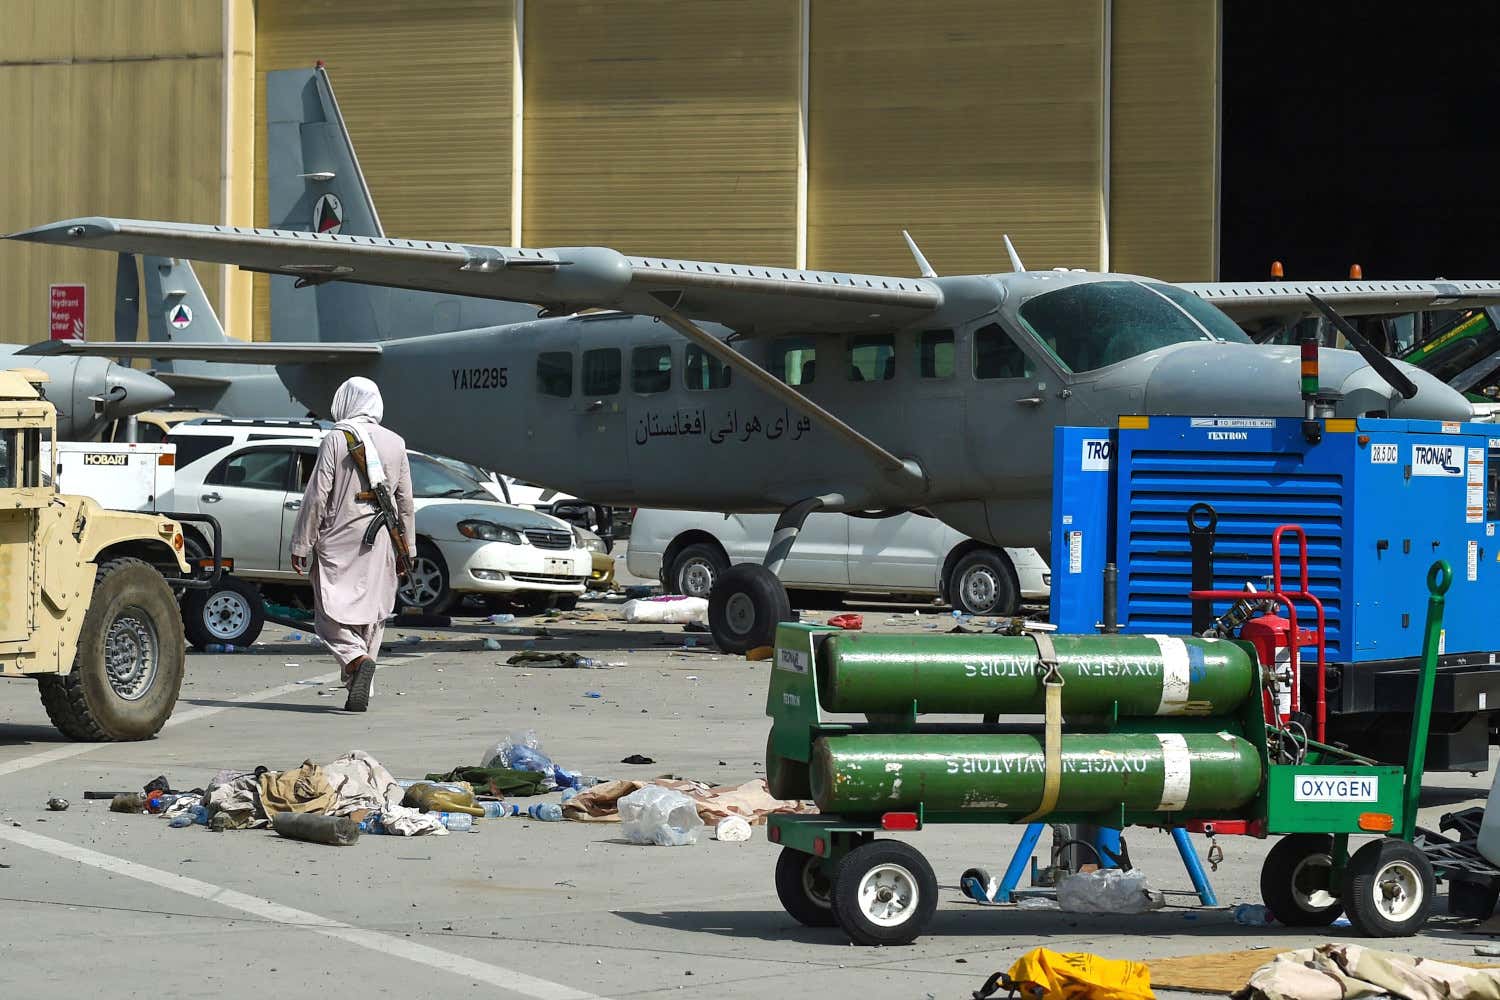 Taliban Show Off Captured Aircraft And Other Spoils After Taking Over Kabul's Airport